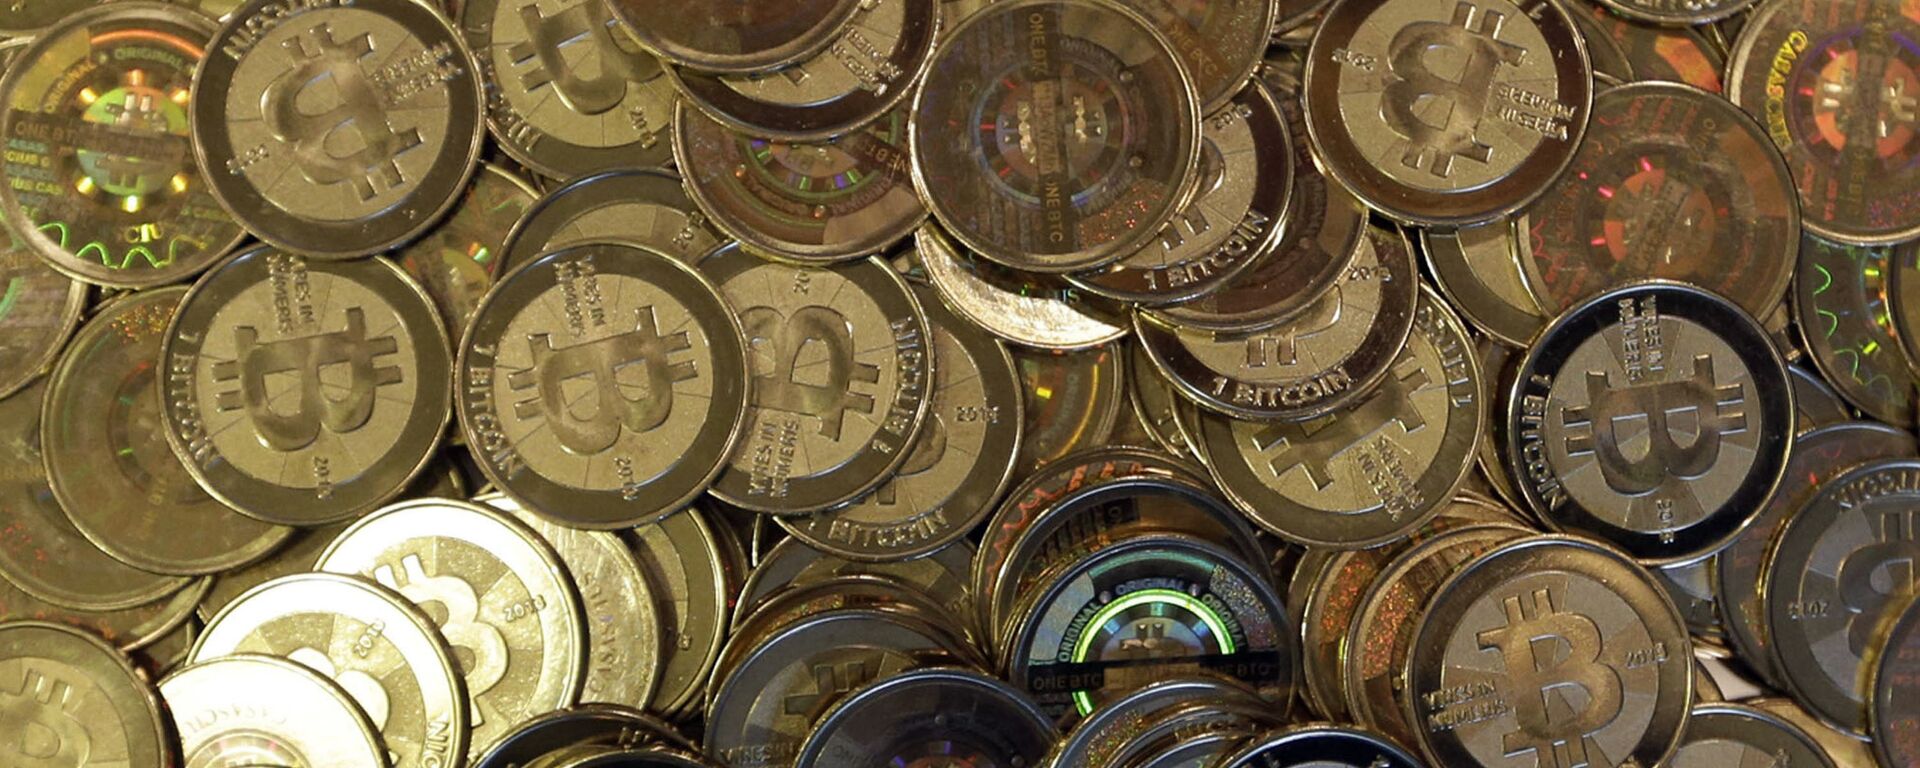 This April 3, 2013, file photo shows bitcoin tokens in Sandy, Utah. Unidentified hackers broke into the Twitter accounts of technology moguls, politicians, celebrities and major companies Wednesday, July 15, 2020, in an apparent Bitcoin scam - Sputnik International, 1920, 24.09.2021